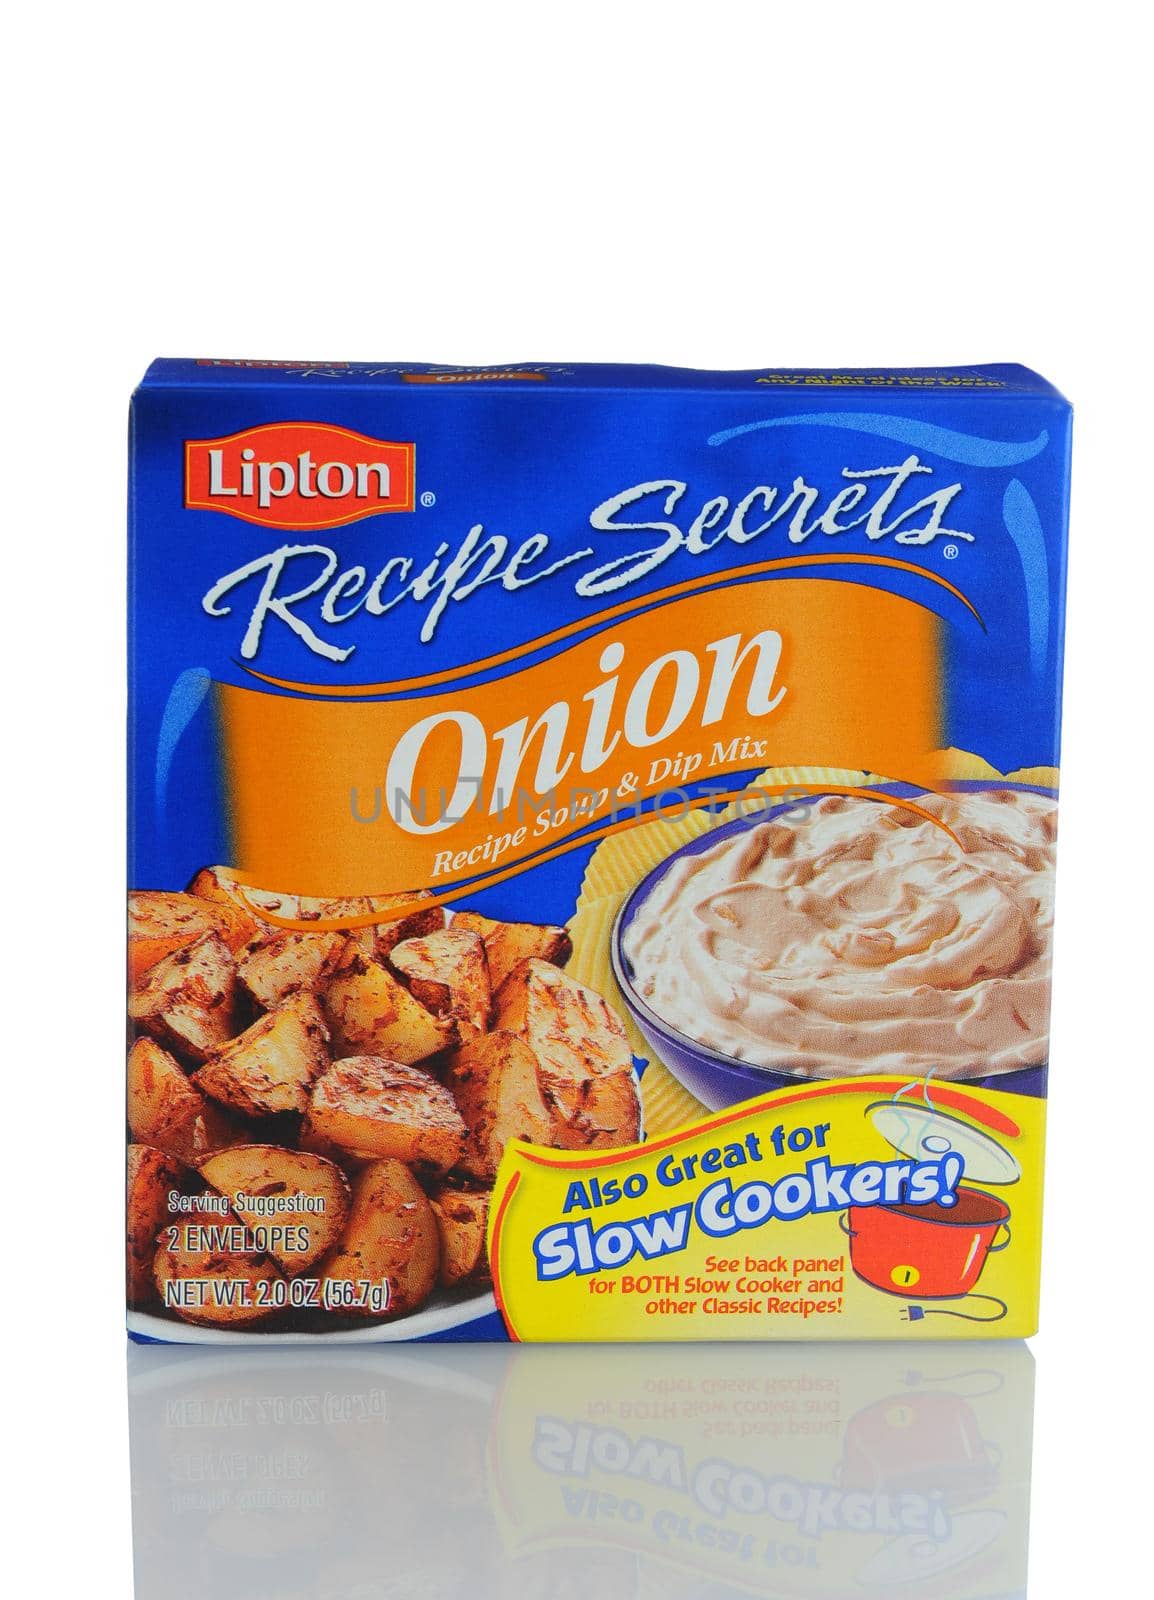 IRVINE, CA - January 11, 2013: A 2 oz. box of  Lipton Onion Soup and Dip Mix. Lipton is owned by Unilever one of the oldest multinational companies, with operations in over 100 countries.